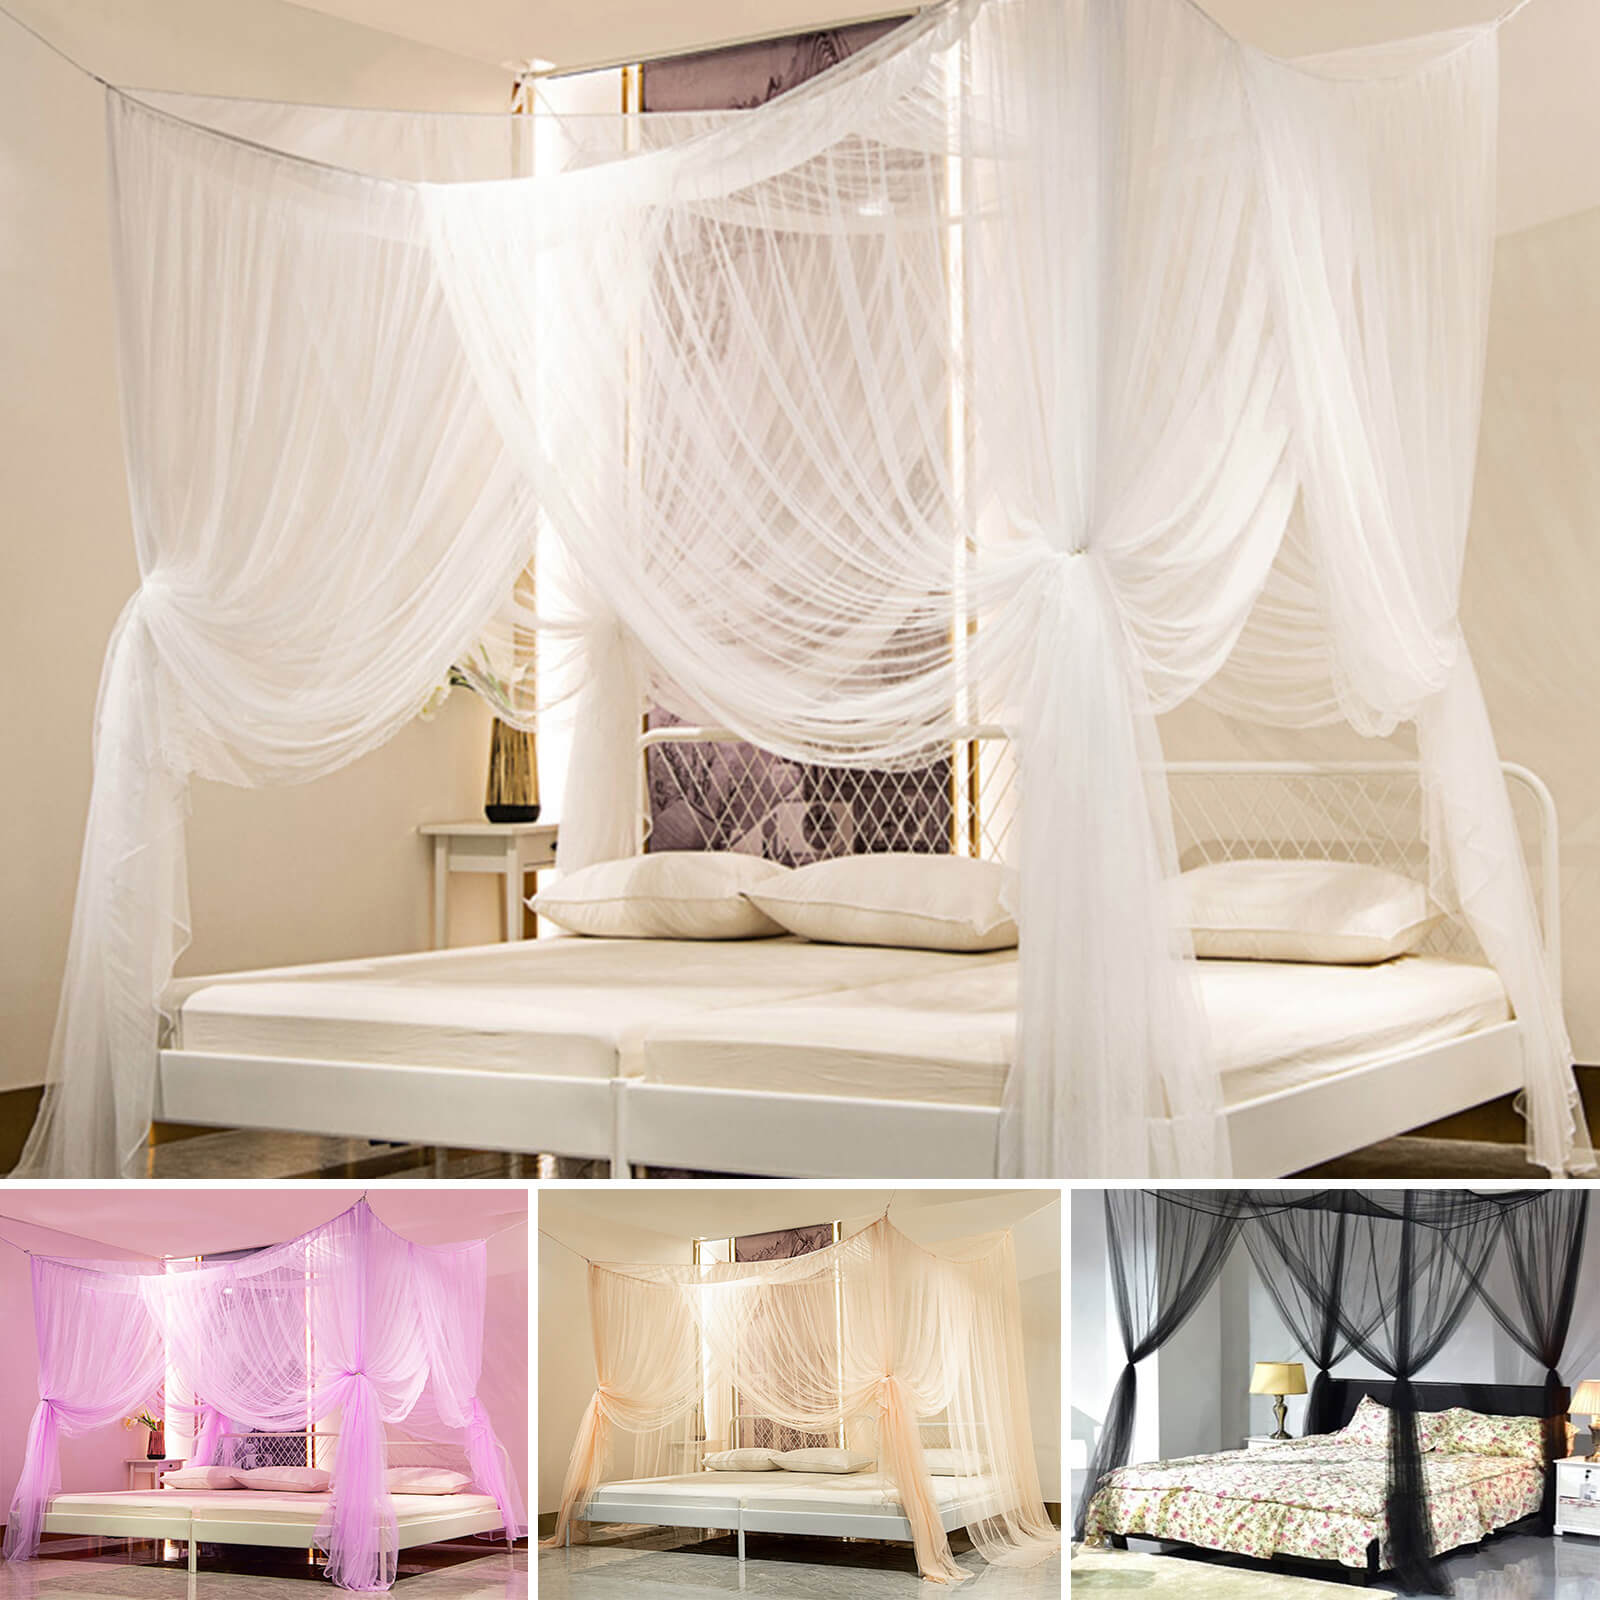 4 Corner Mosquito Net In Different Colors